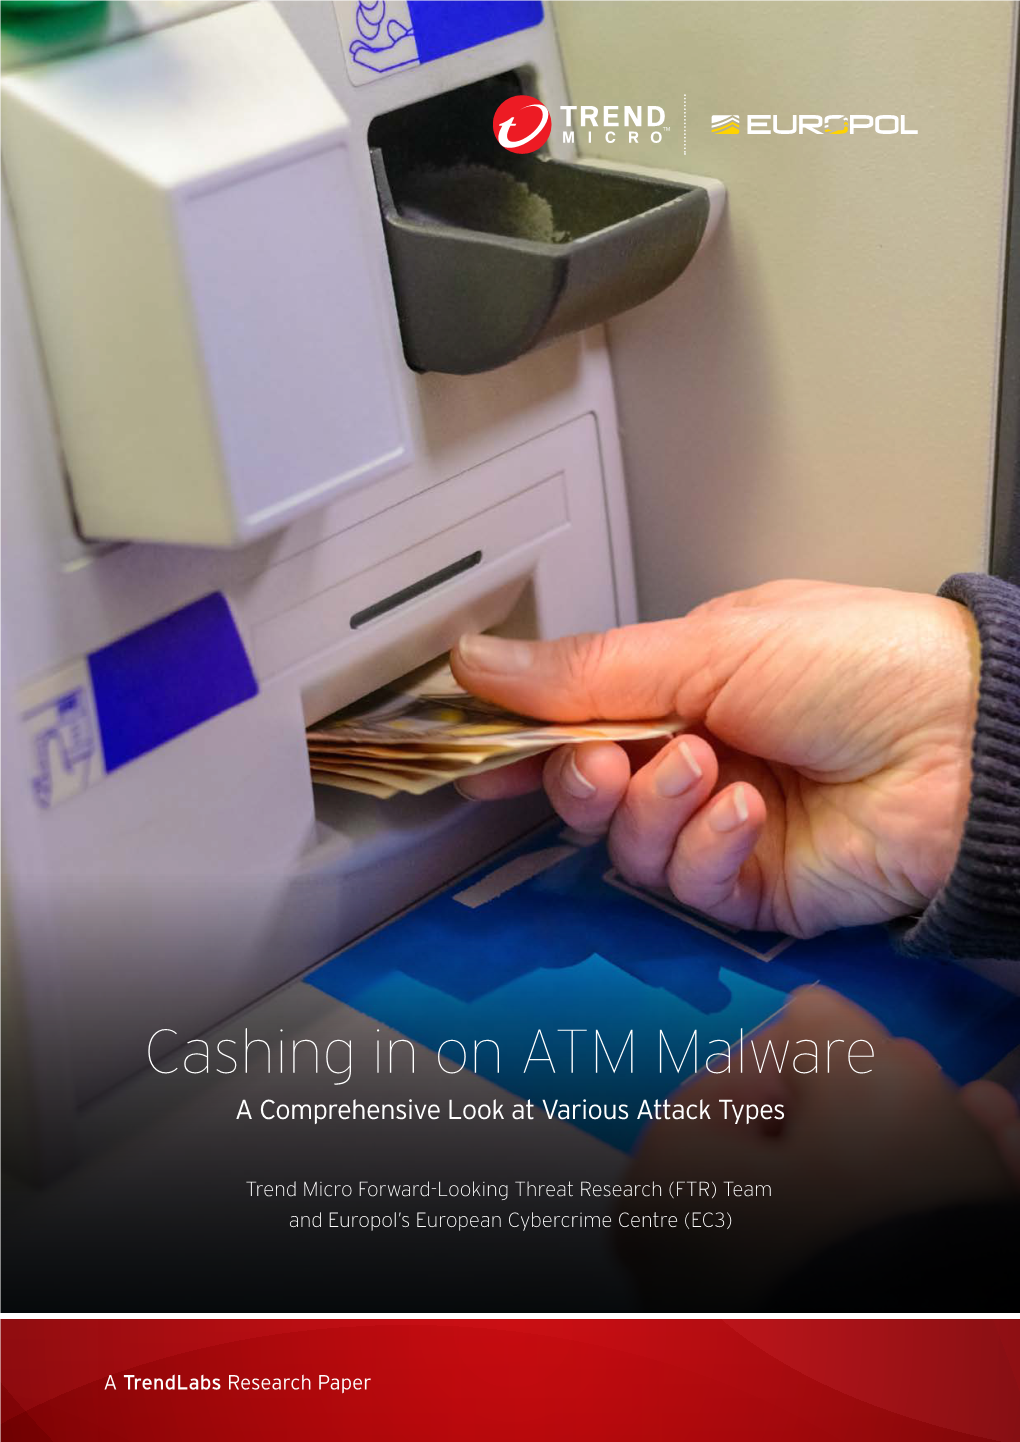 Cashing in on ATM Malware a Comprehensive Look at Various Attack Types